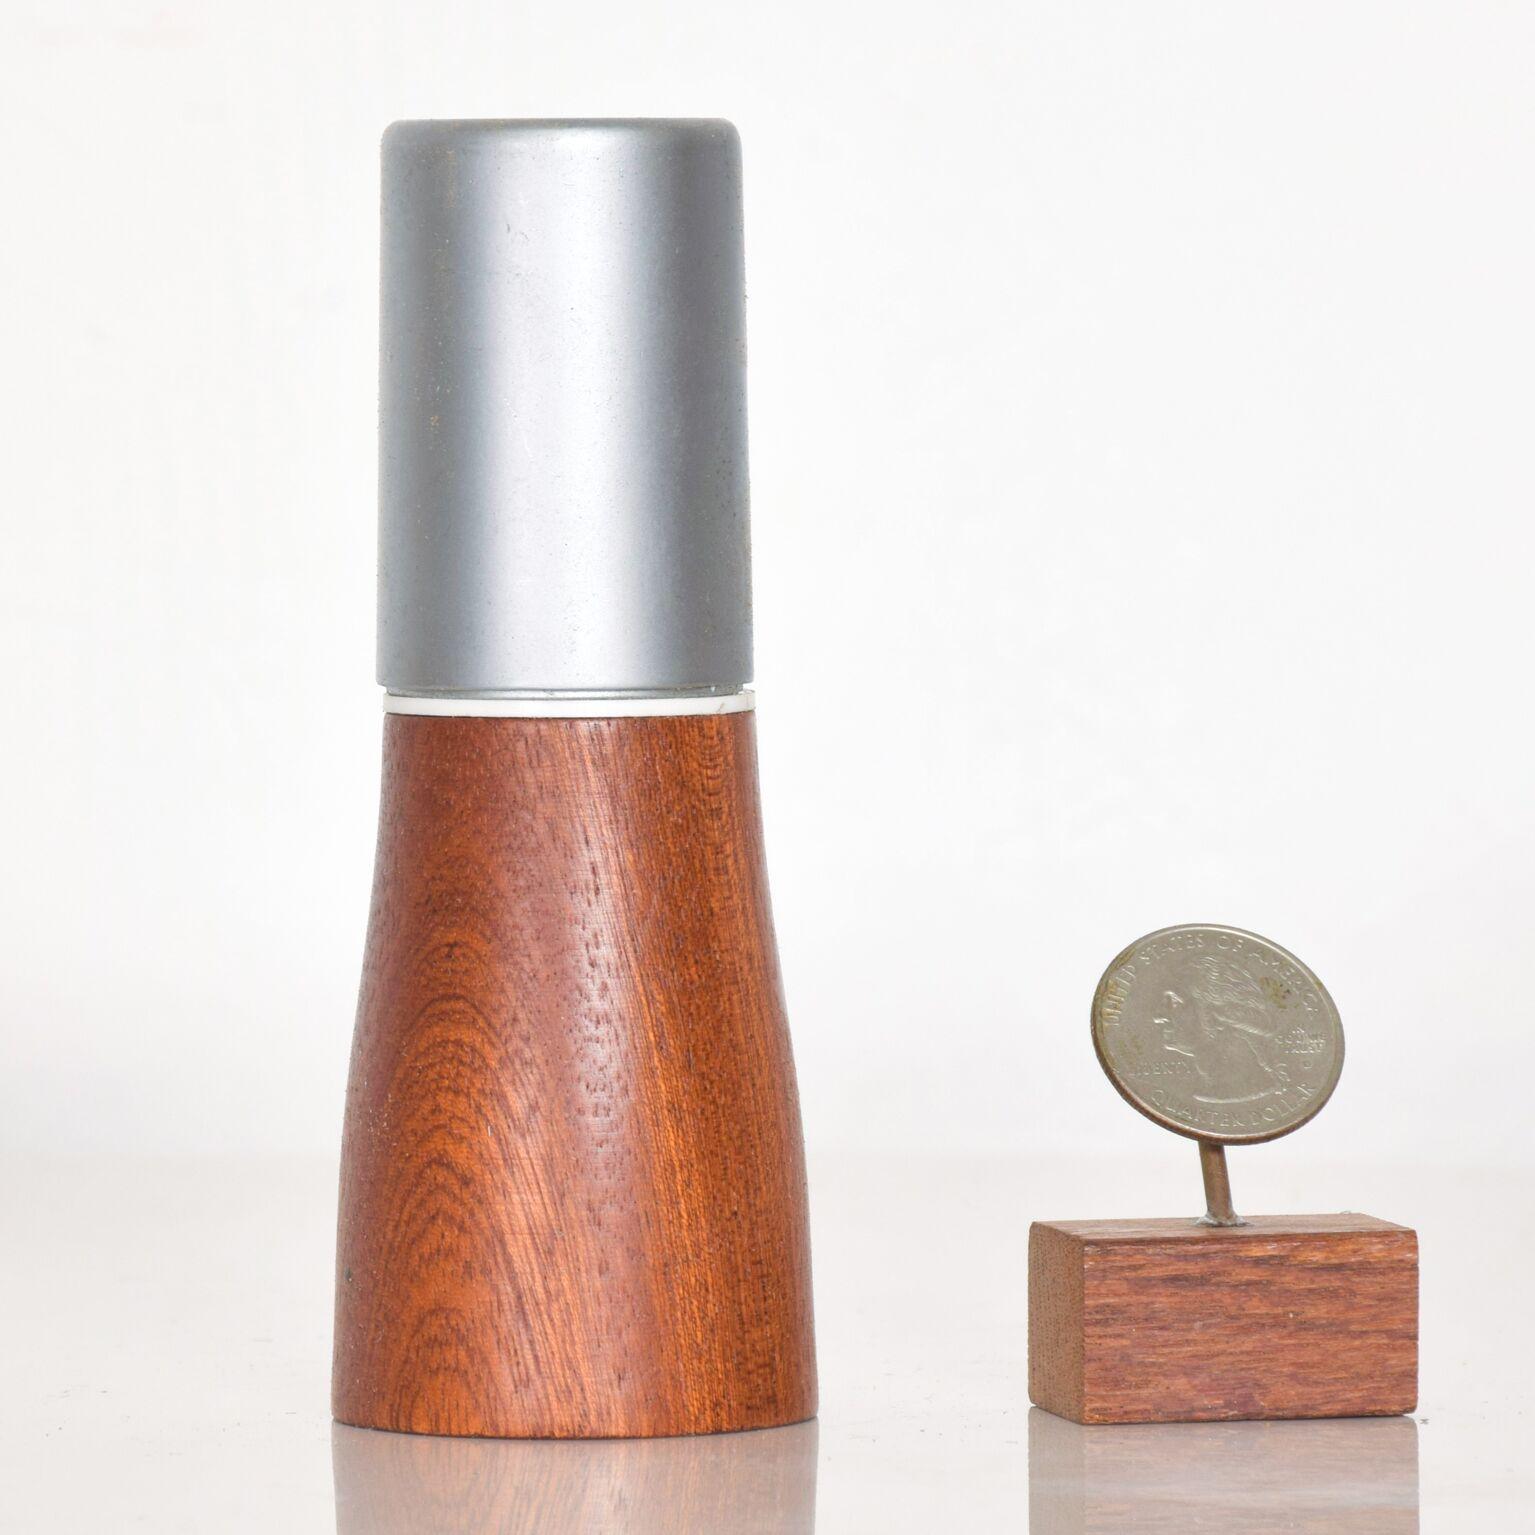 For your consideration: Modern design teak wood peppermill grinder with aluminum top

Dimensions: 4 3/4